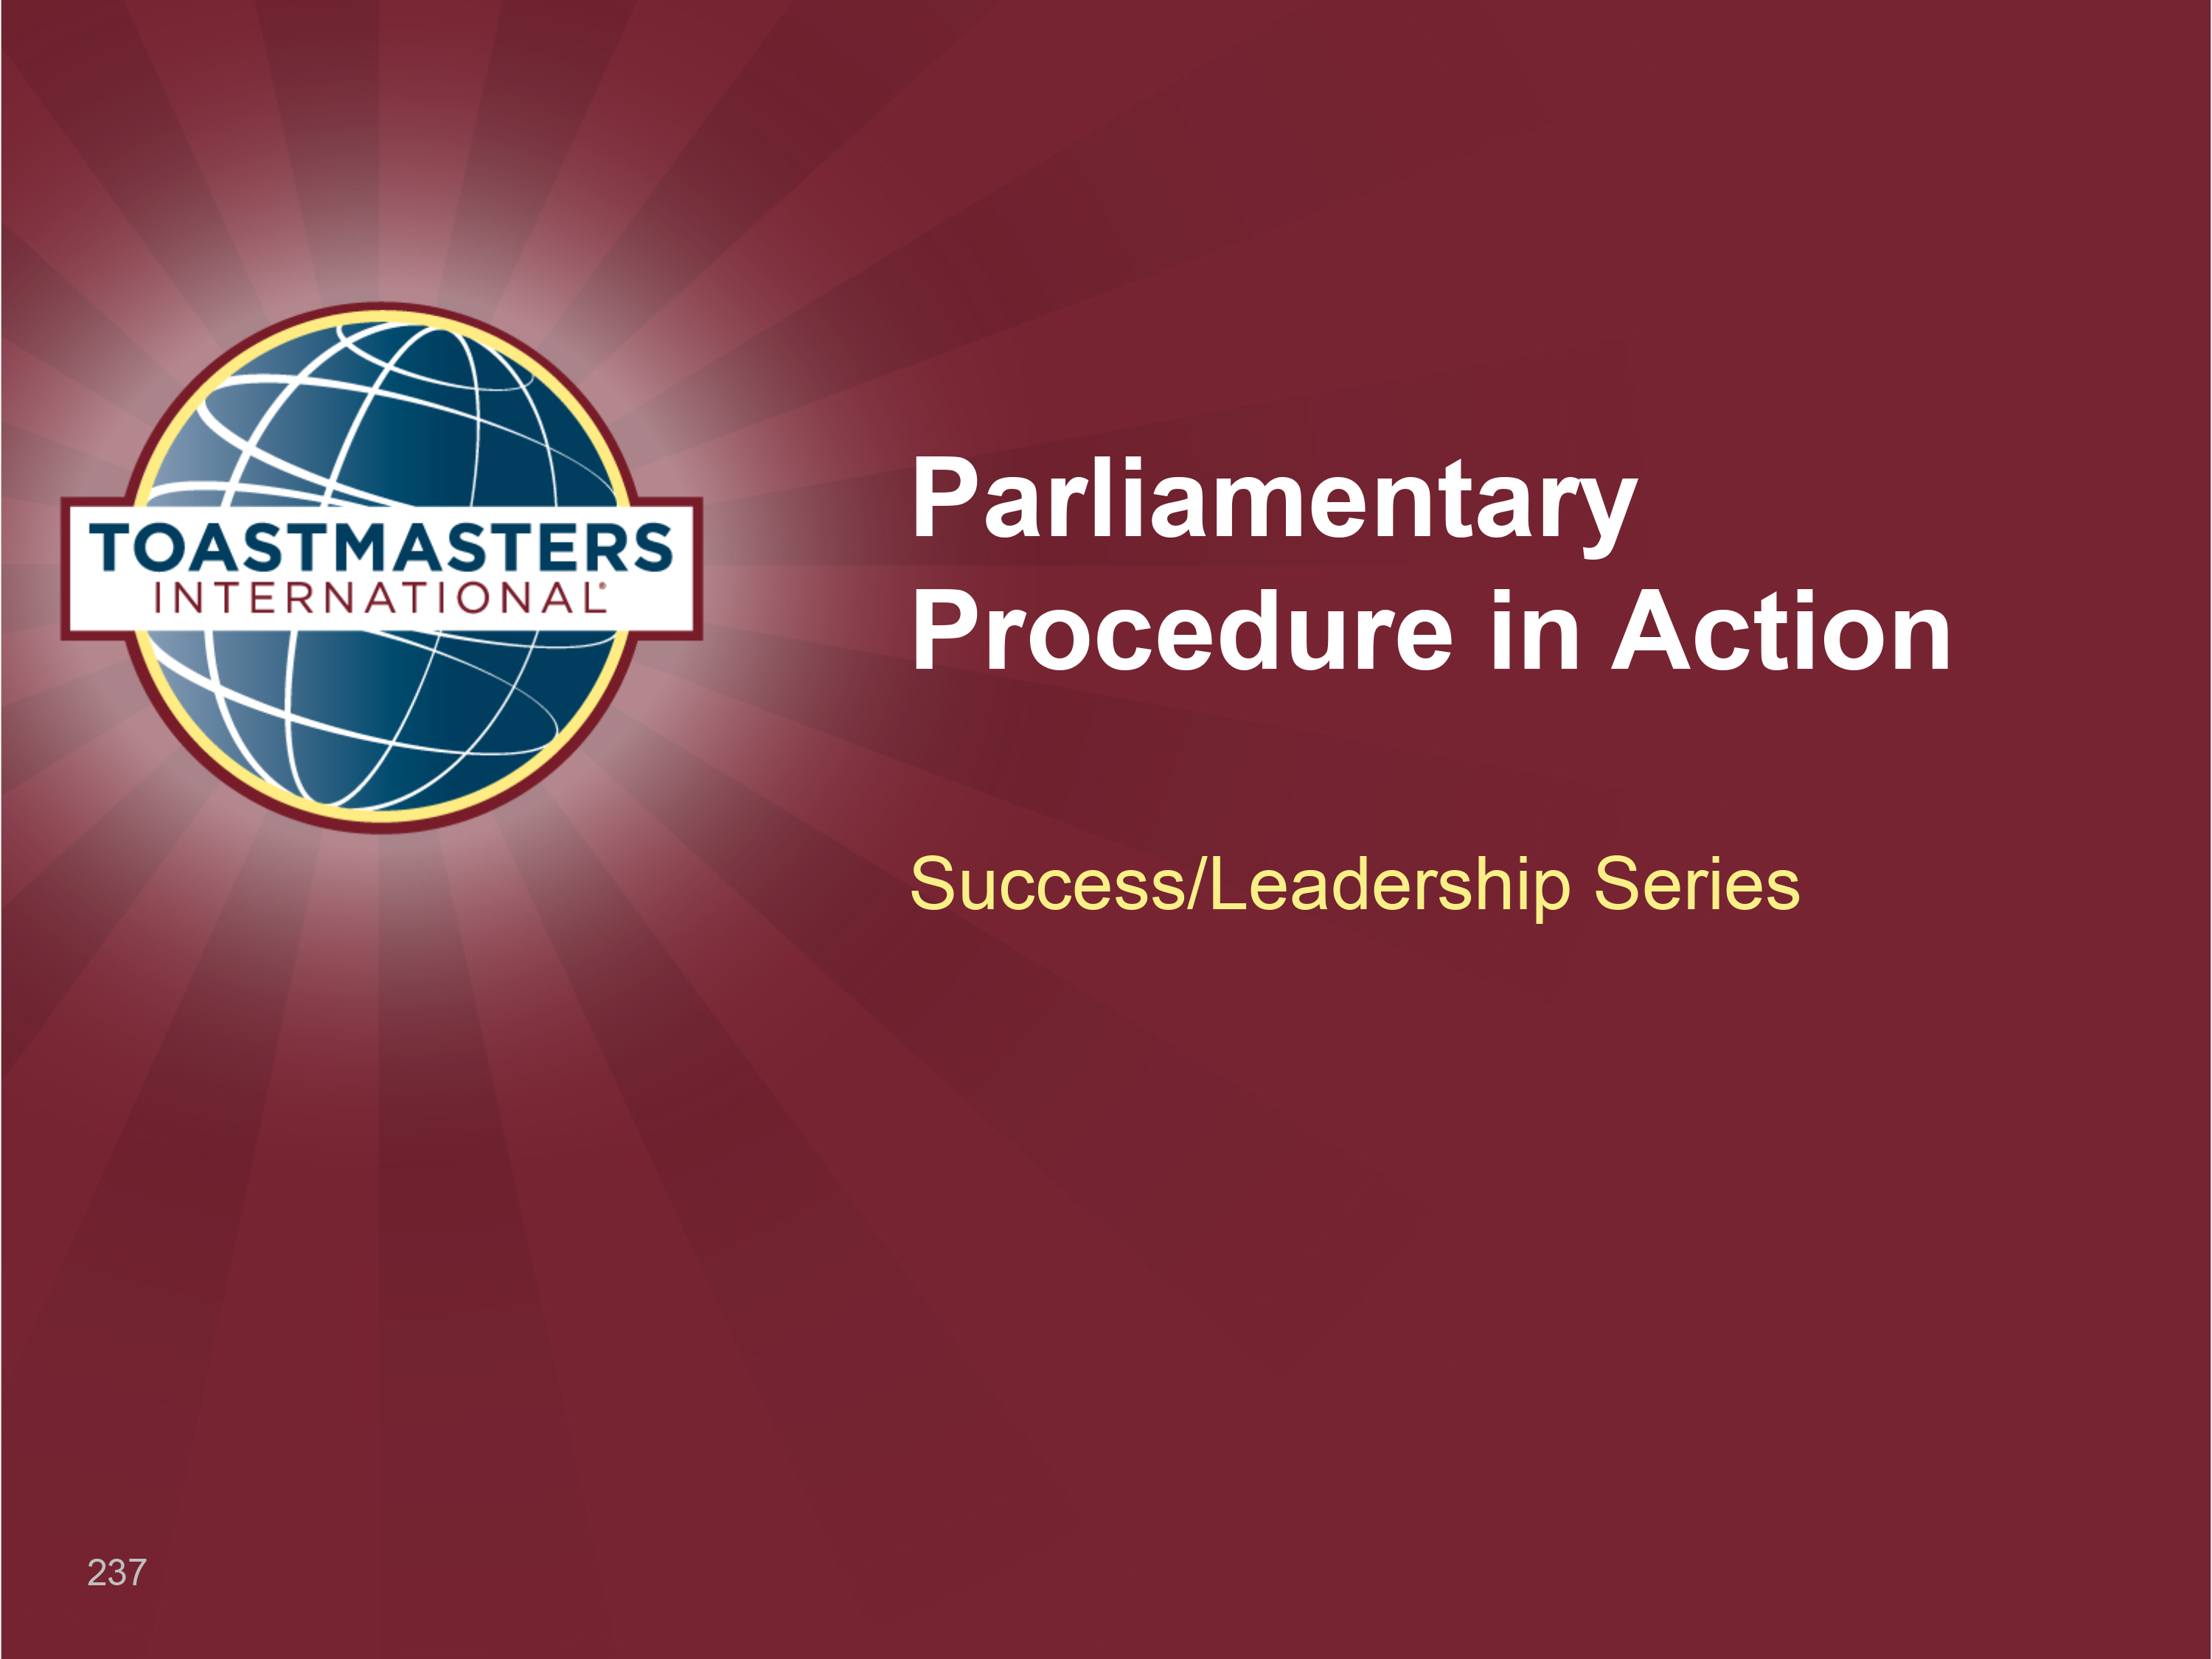 Parliamentary Procedure in Action Workshop (PPT)